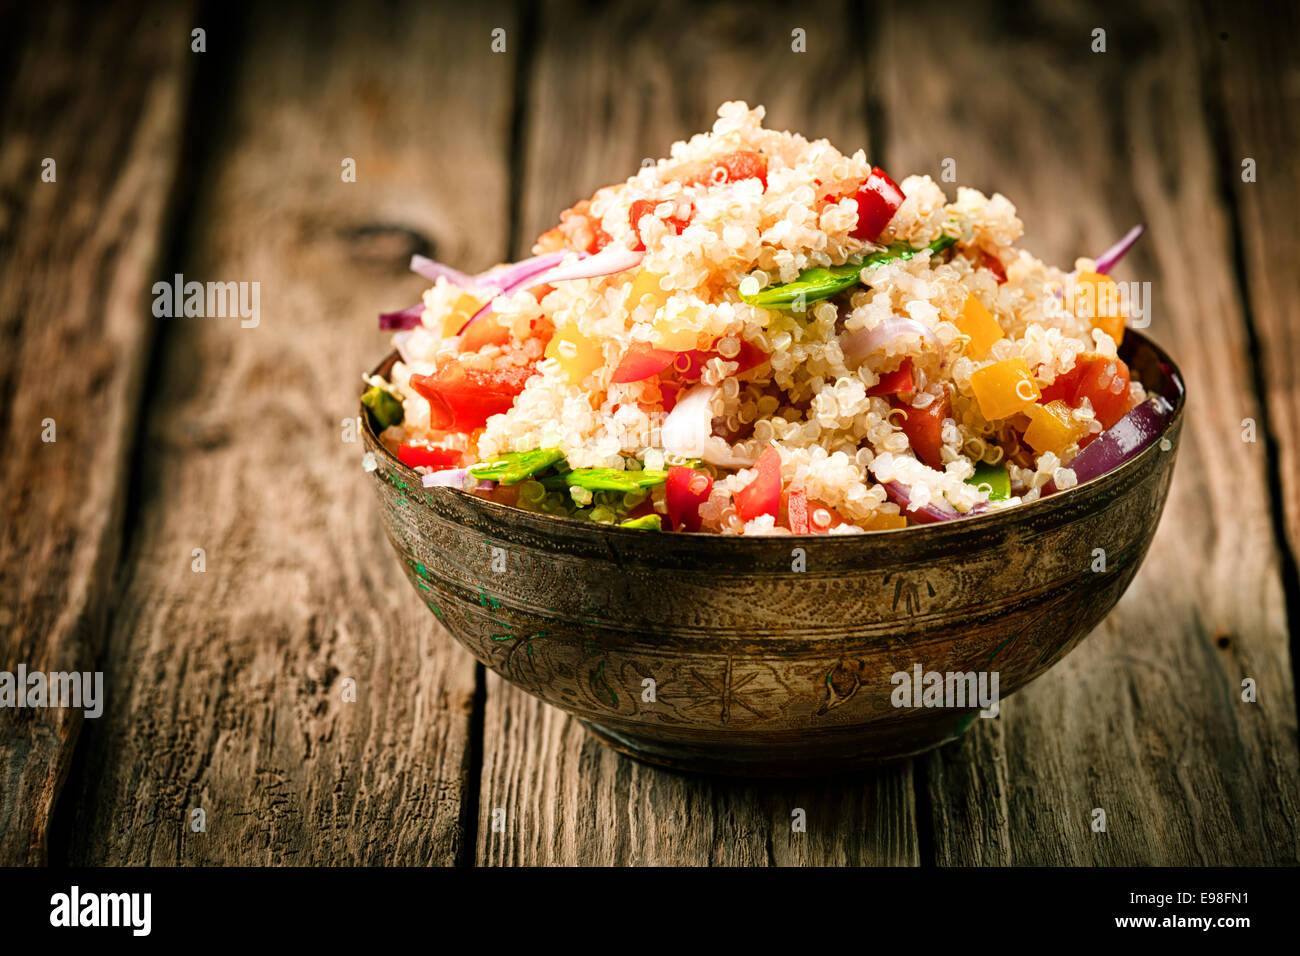 Heaped rustic bowl of savory quinoa with herbs, peppers and tomato for a healthy vegetarian dish rich in protein and nutrients standing on old wooden boards Stock Photo